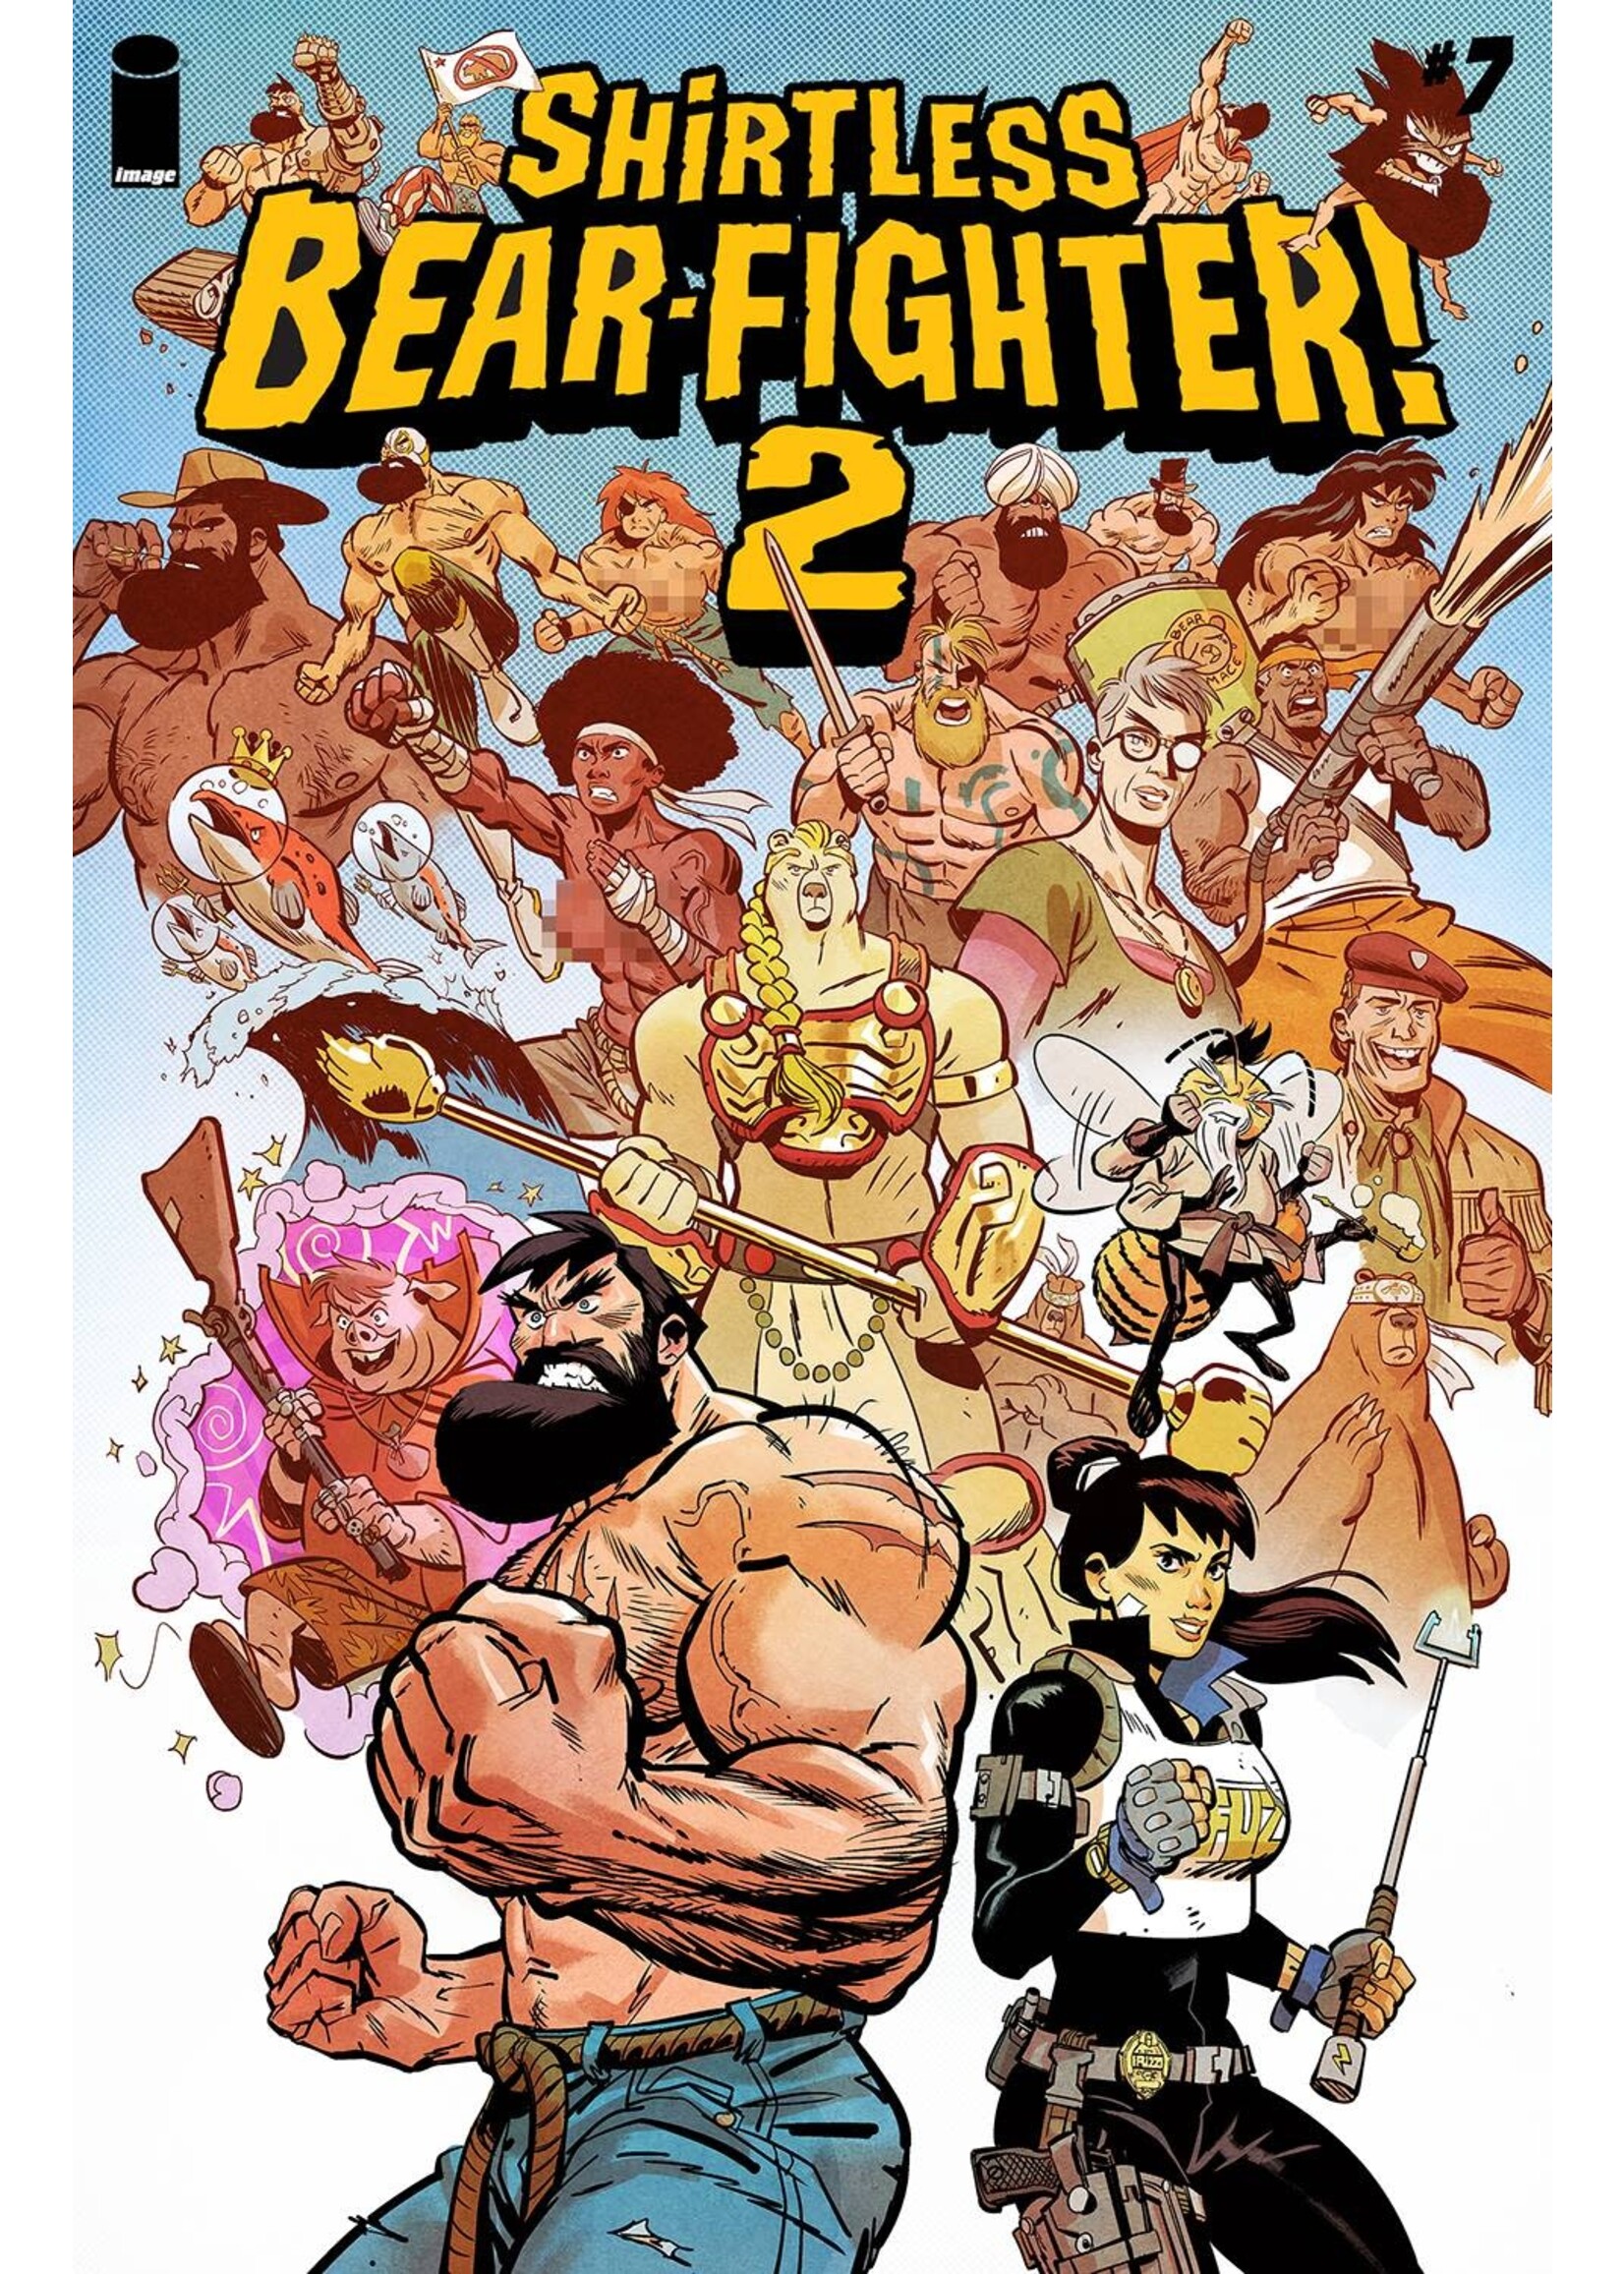 IMAGE COMICS SHIRTLESS BEAR-FIGHTER 2 complete 7 issue series